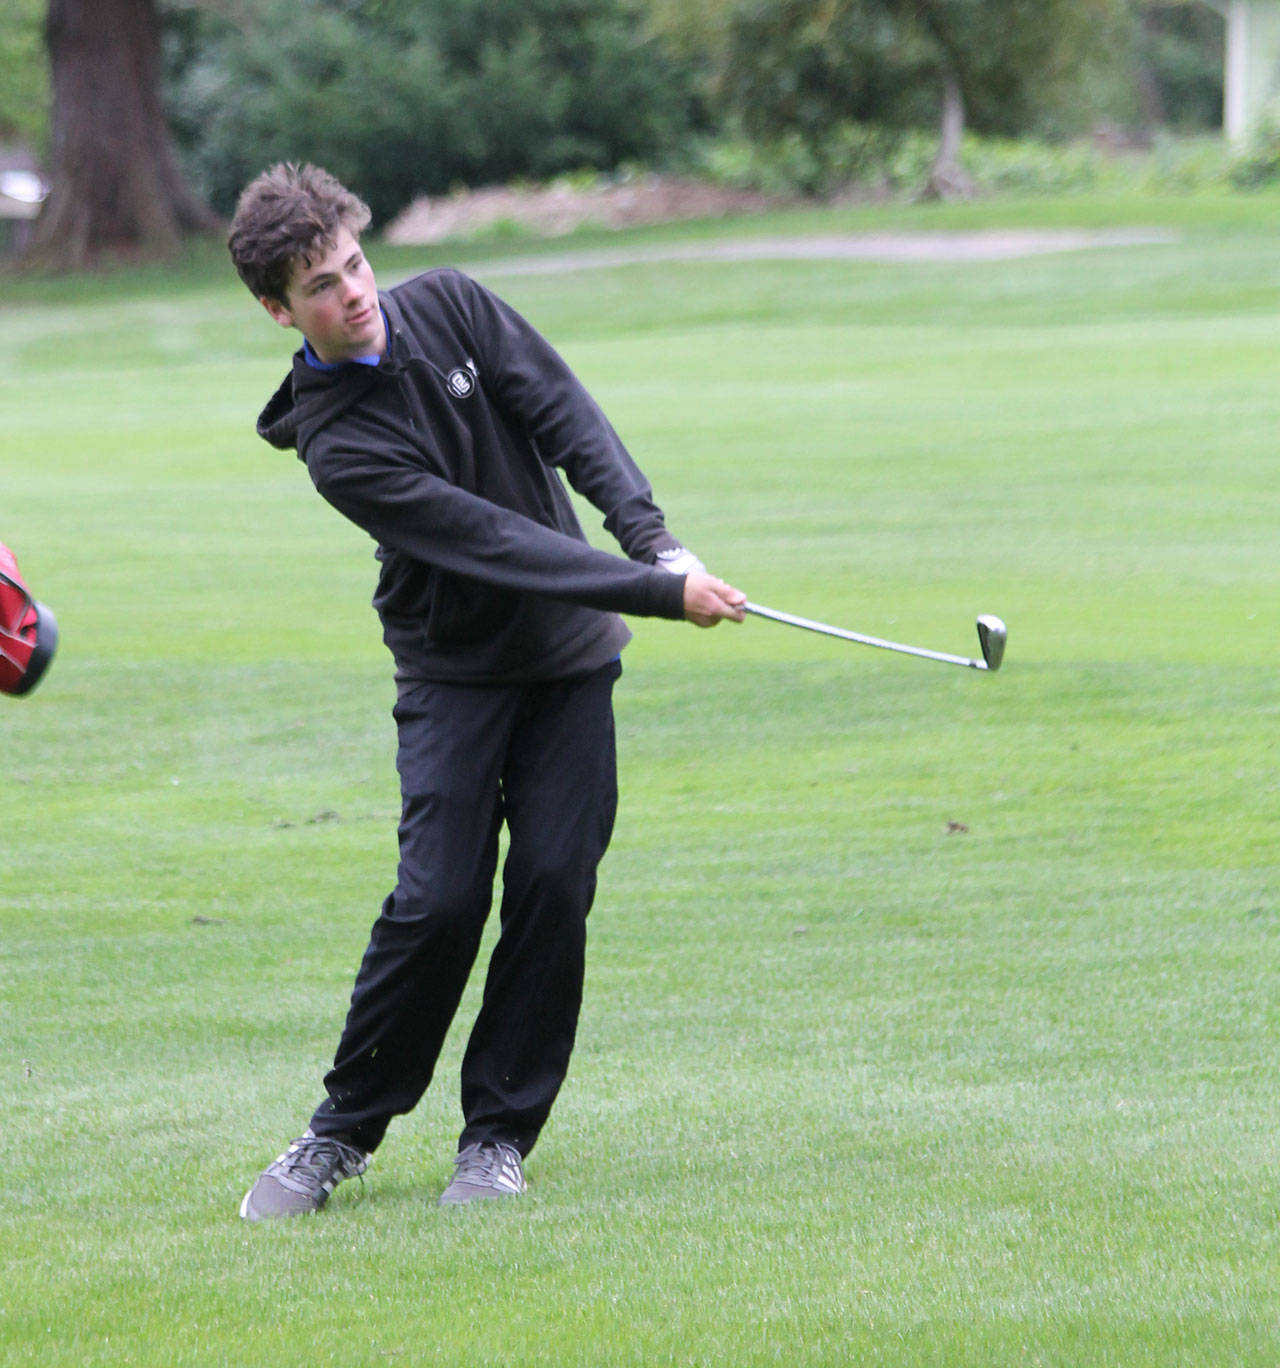 South Whidbey’s Gabe Jacobson-Ross, shown here in a match earlier this season, placed 26th in the state 1A golf tournament this week. (Photo by Jim Waller/South Whidbey Record)